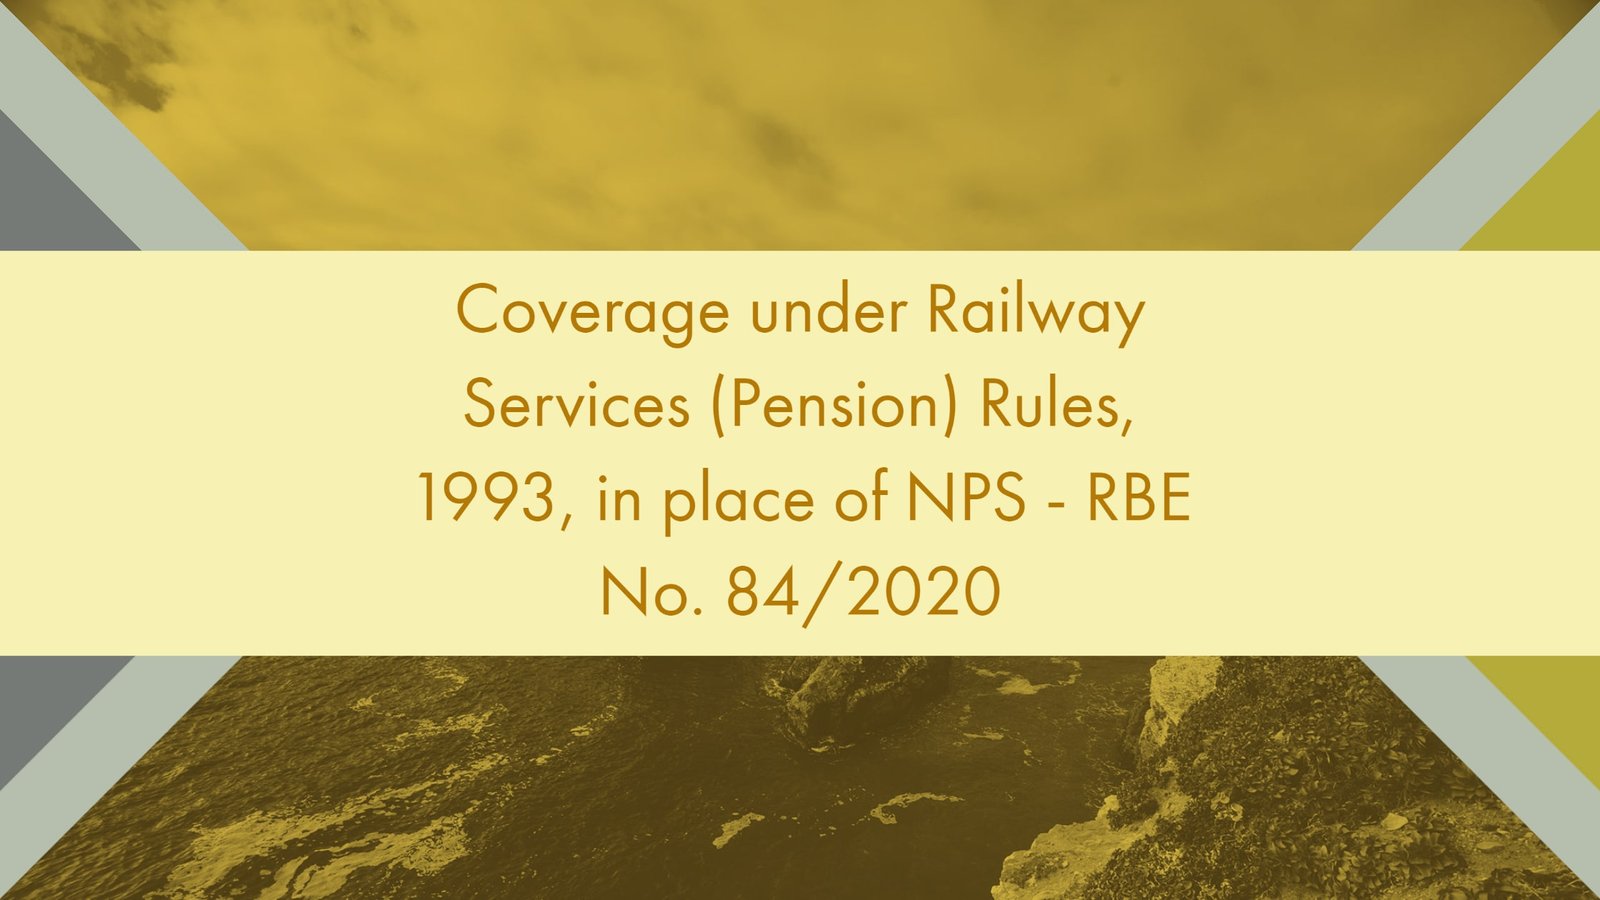 Coverage under Railway Services (Pension) Rules, 1993, in place of NPS - RBE No. 84/2020